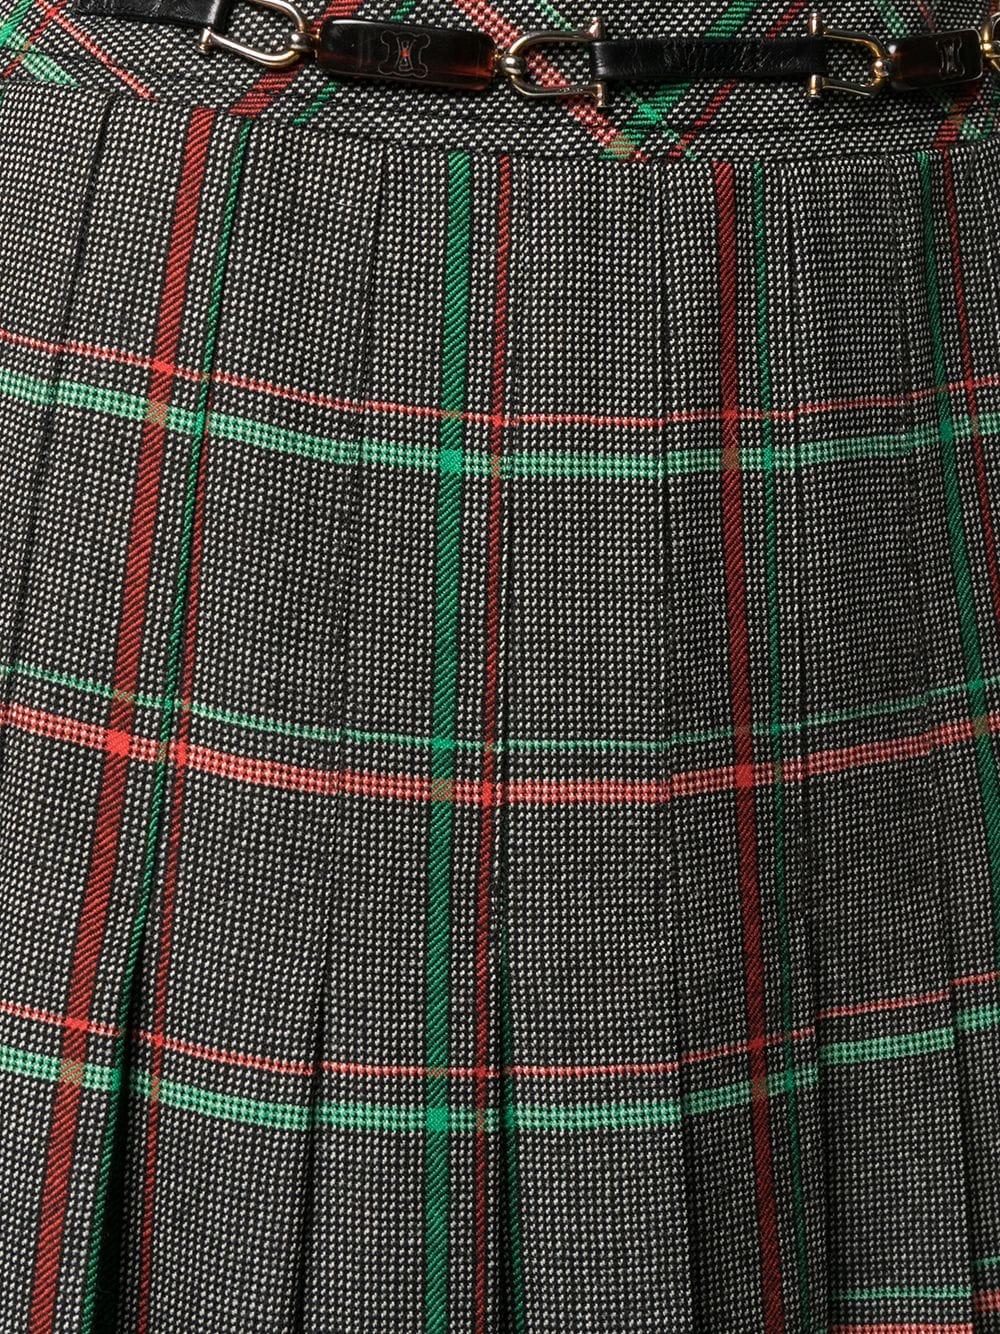 Celine wool pleated check skirt featuring multicolour check pattern, knife-pleat design, high-waisted and belted waist with iconic leather detail.
100% wool
Estimated size 38fr/US6 /UK10
In Good Vintage Condition. Made in France
We guarantee you